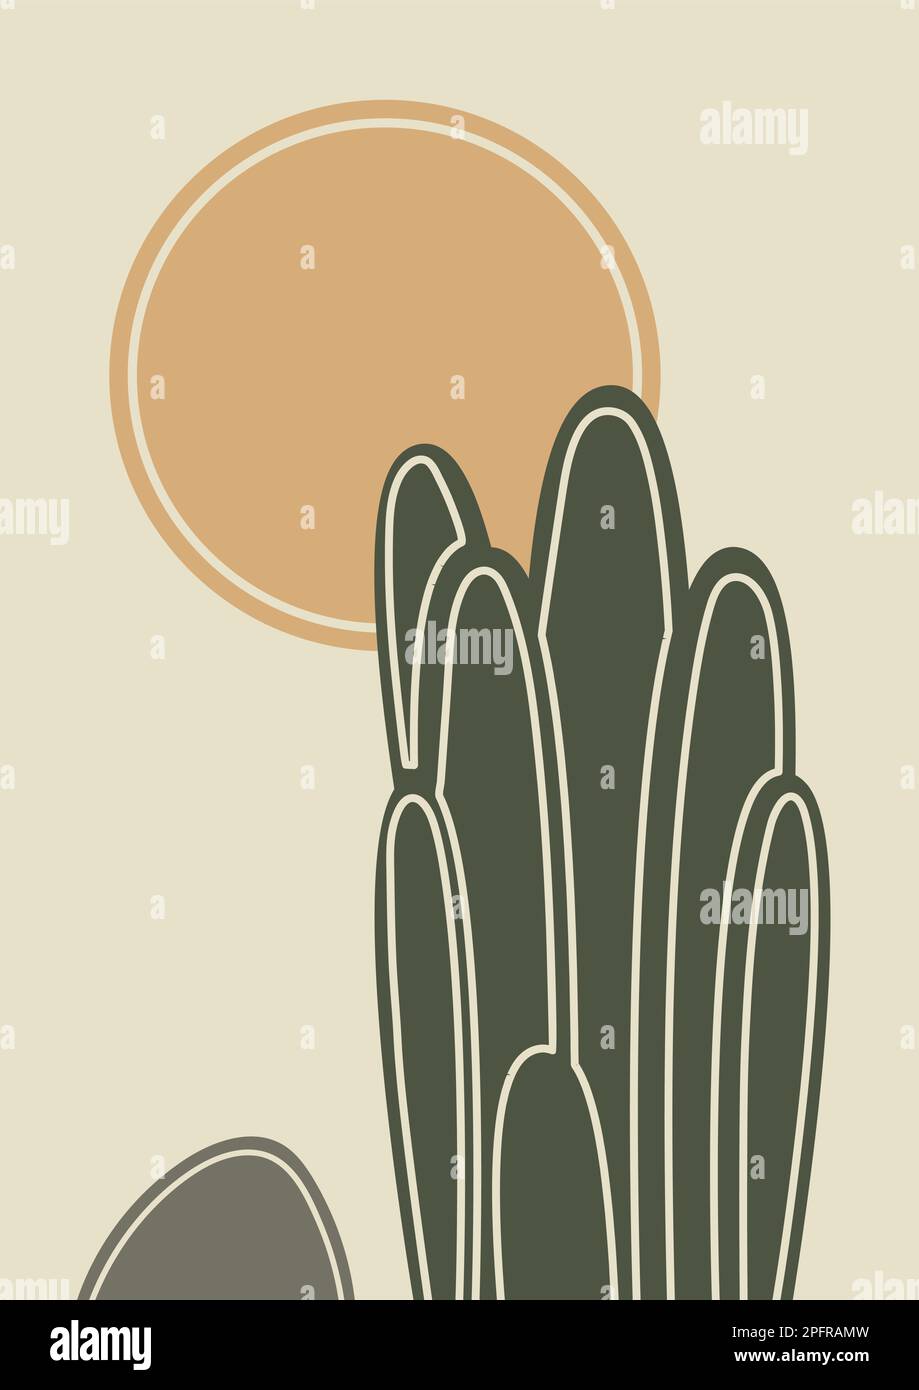 Abstract contemporary aesthetic illustration with cacti and sun. Earth tones, beige colors. Boho wall decor. Stock Vector